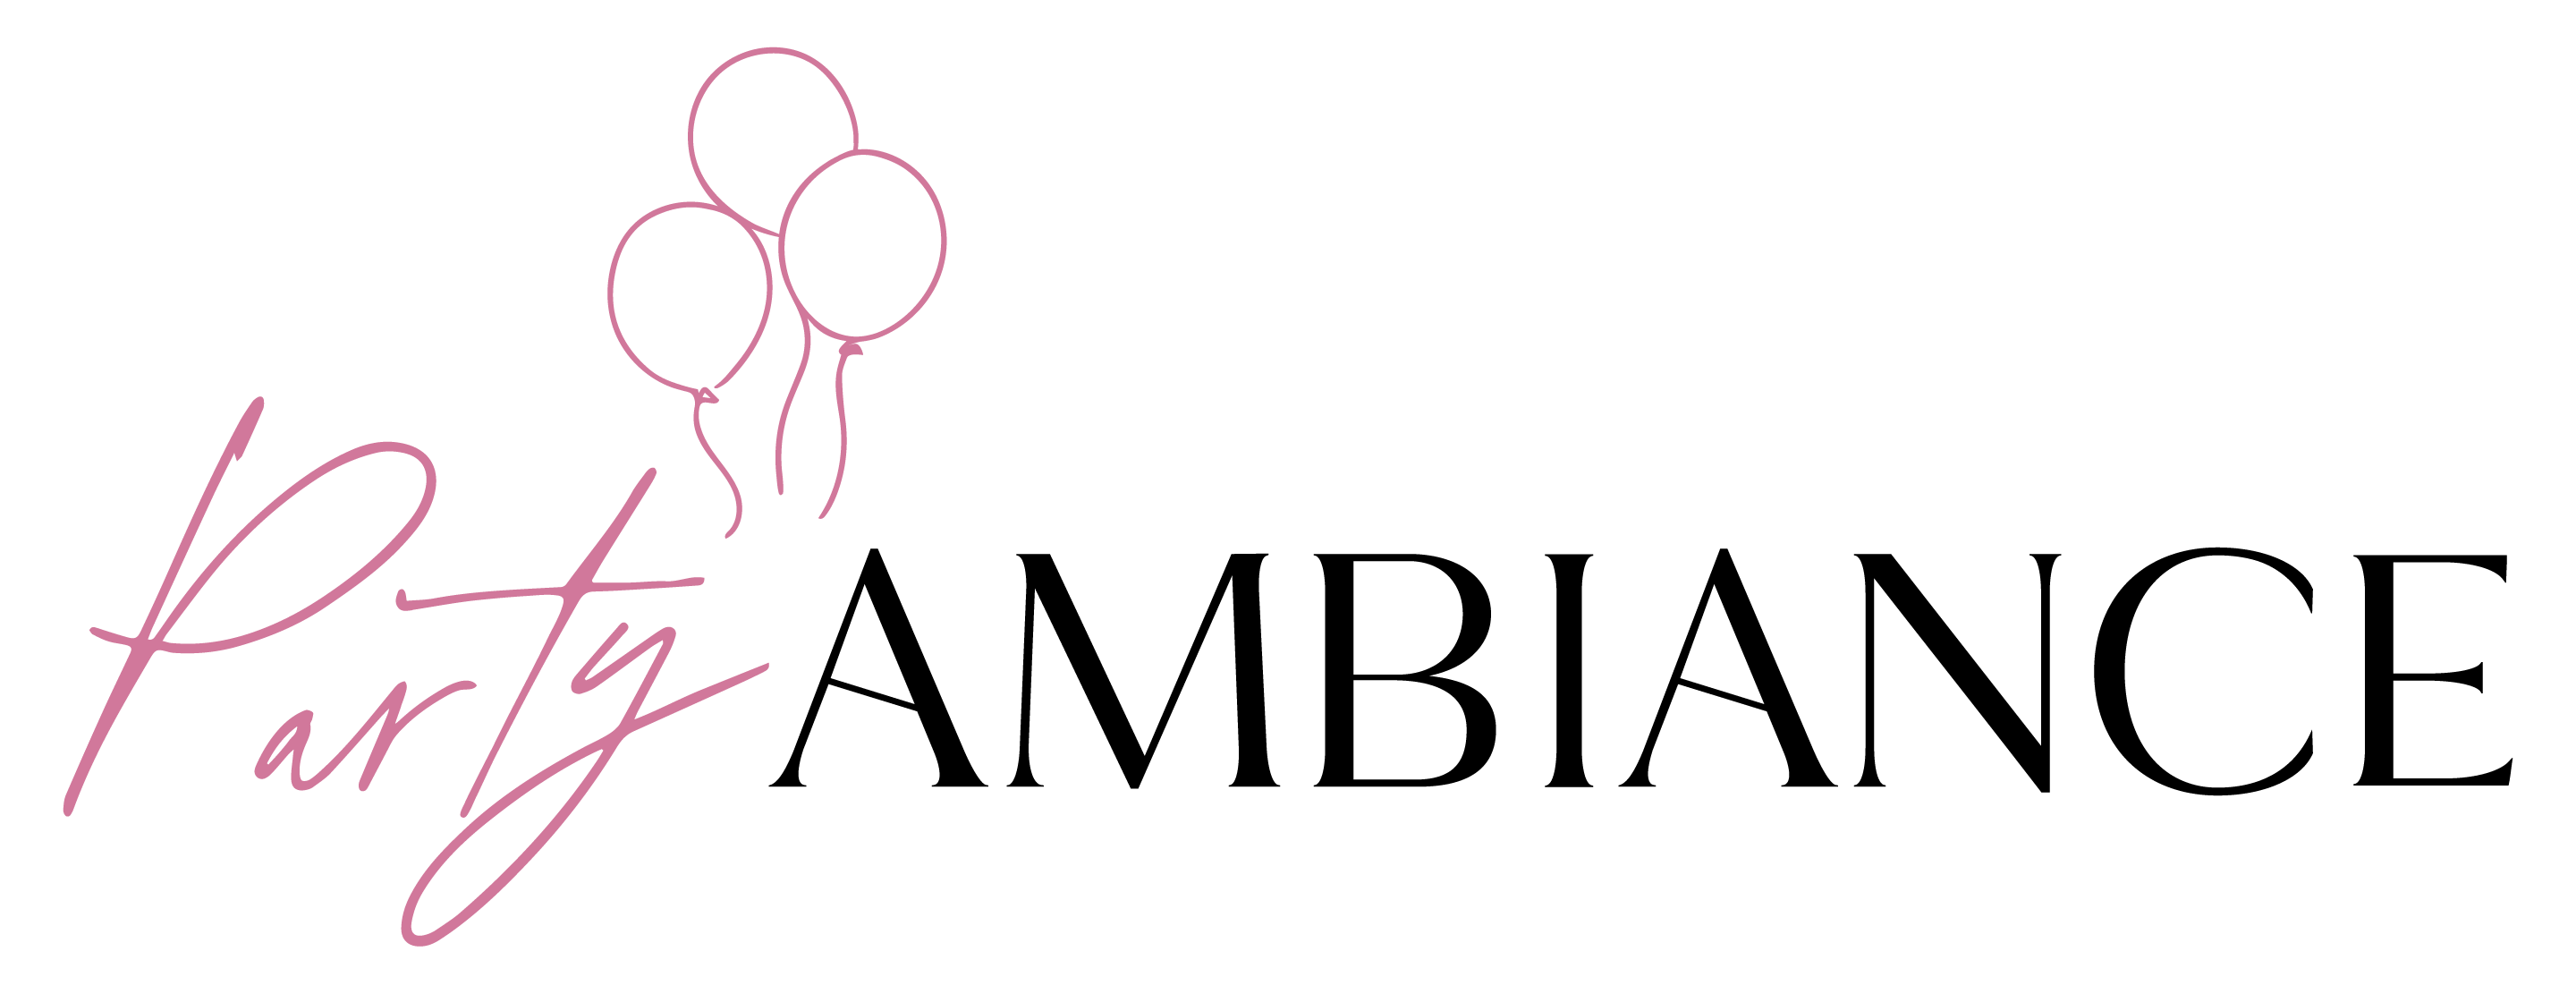 Logo of "party ambiance" in Omaha featuring stylized pink text with an illustration of a balloon garland.